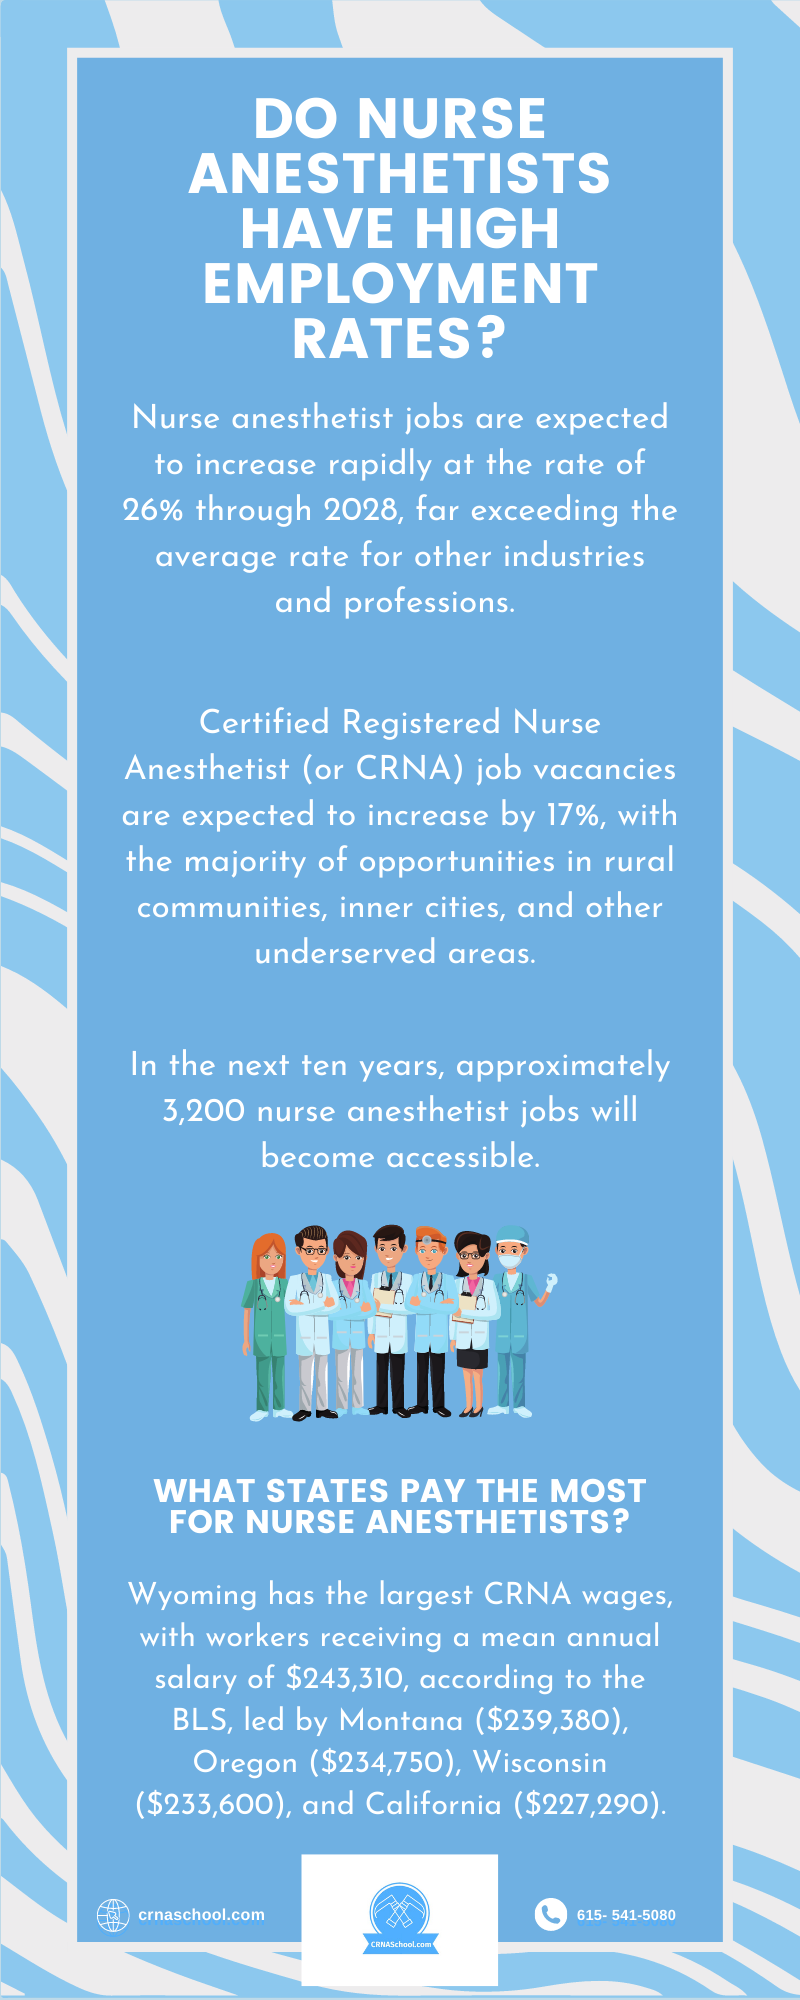 CRNA Qualifications and Capabilities